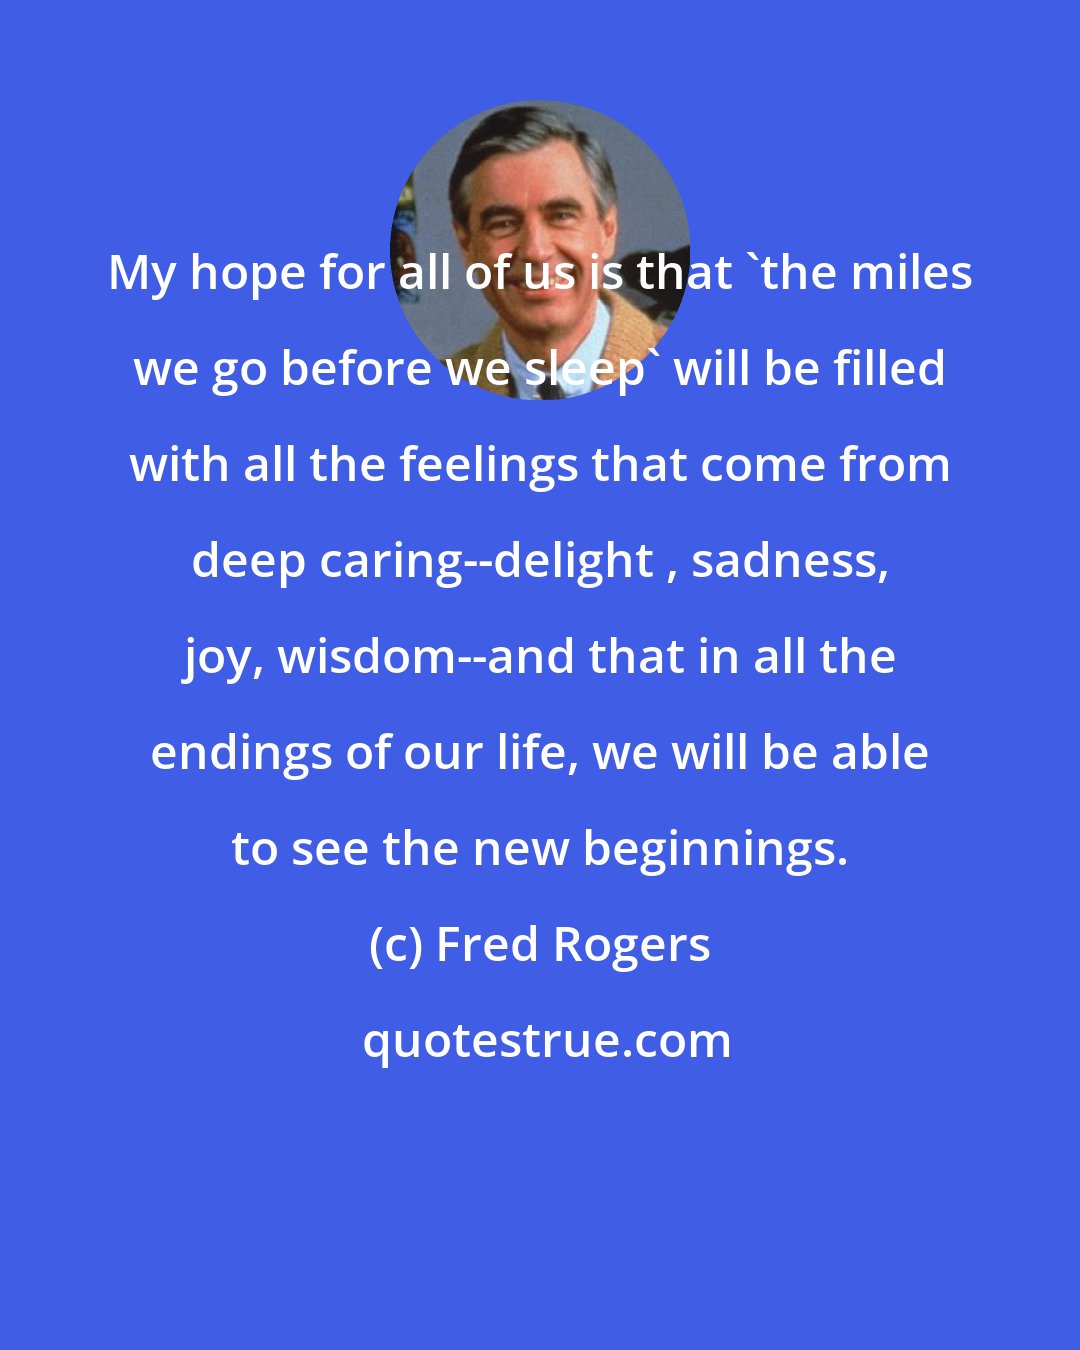 Fred Rogers: My hope for all of us is that 'the miles we go before we sleep' will be filled with all the feelings that come from deep caring--delight , sadness, joy, wisdom--and that in all the endings of our life, we will be able to see the new beginnings.